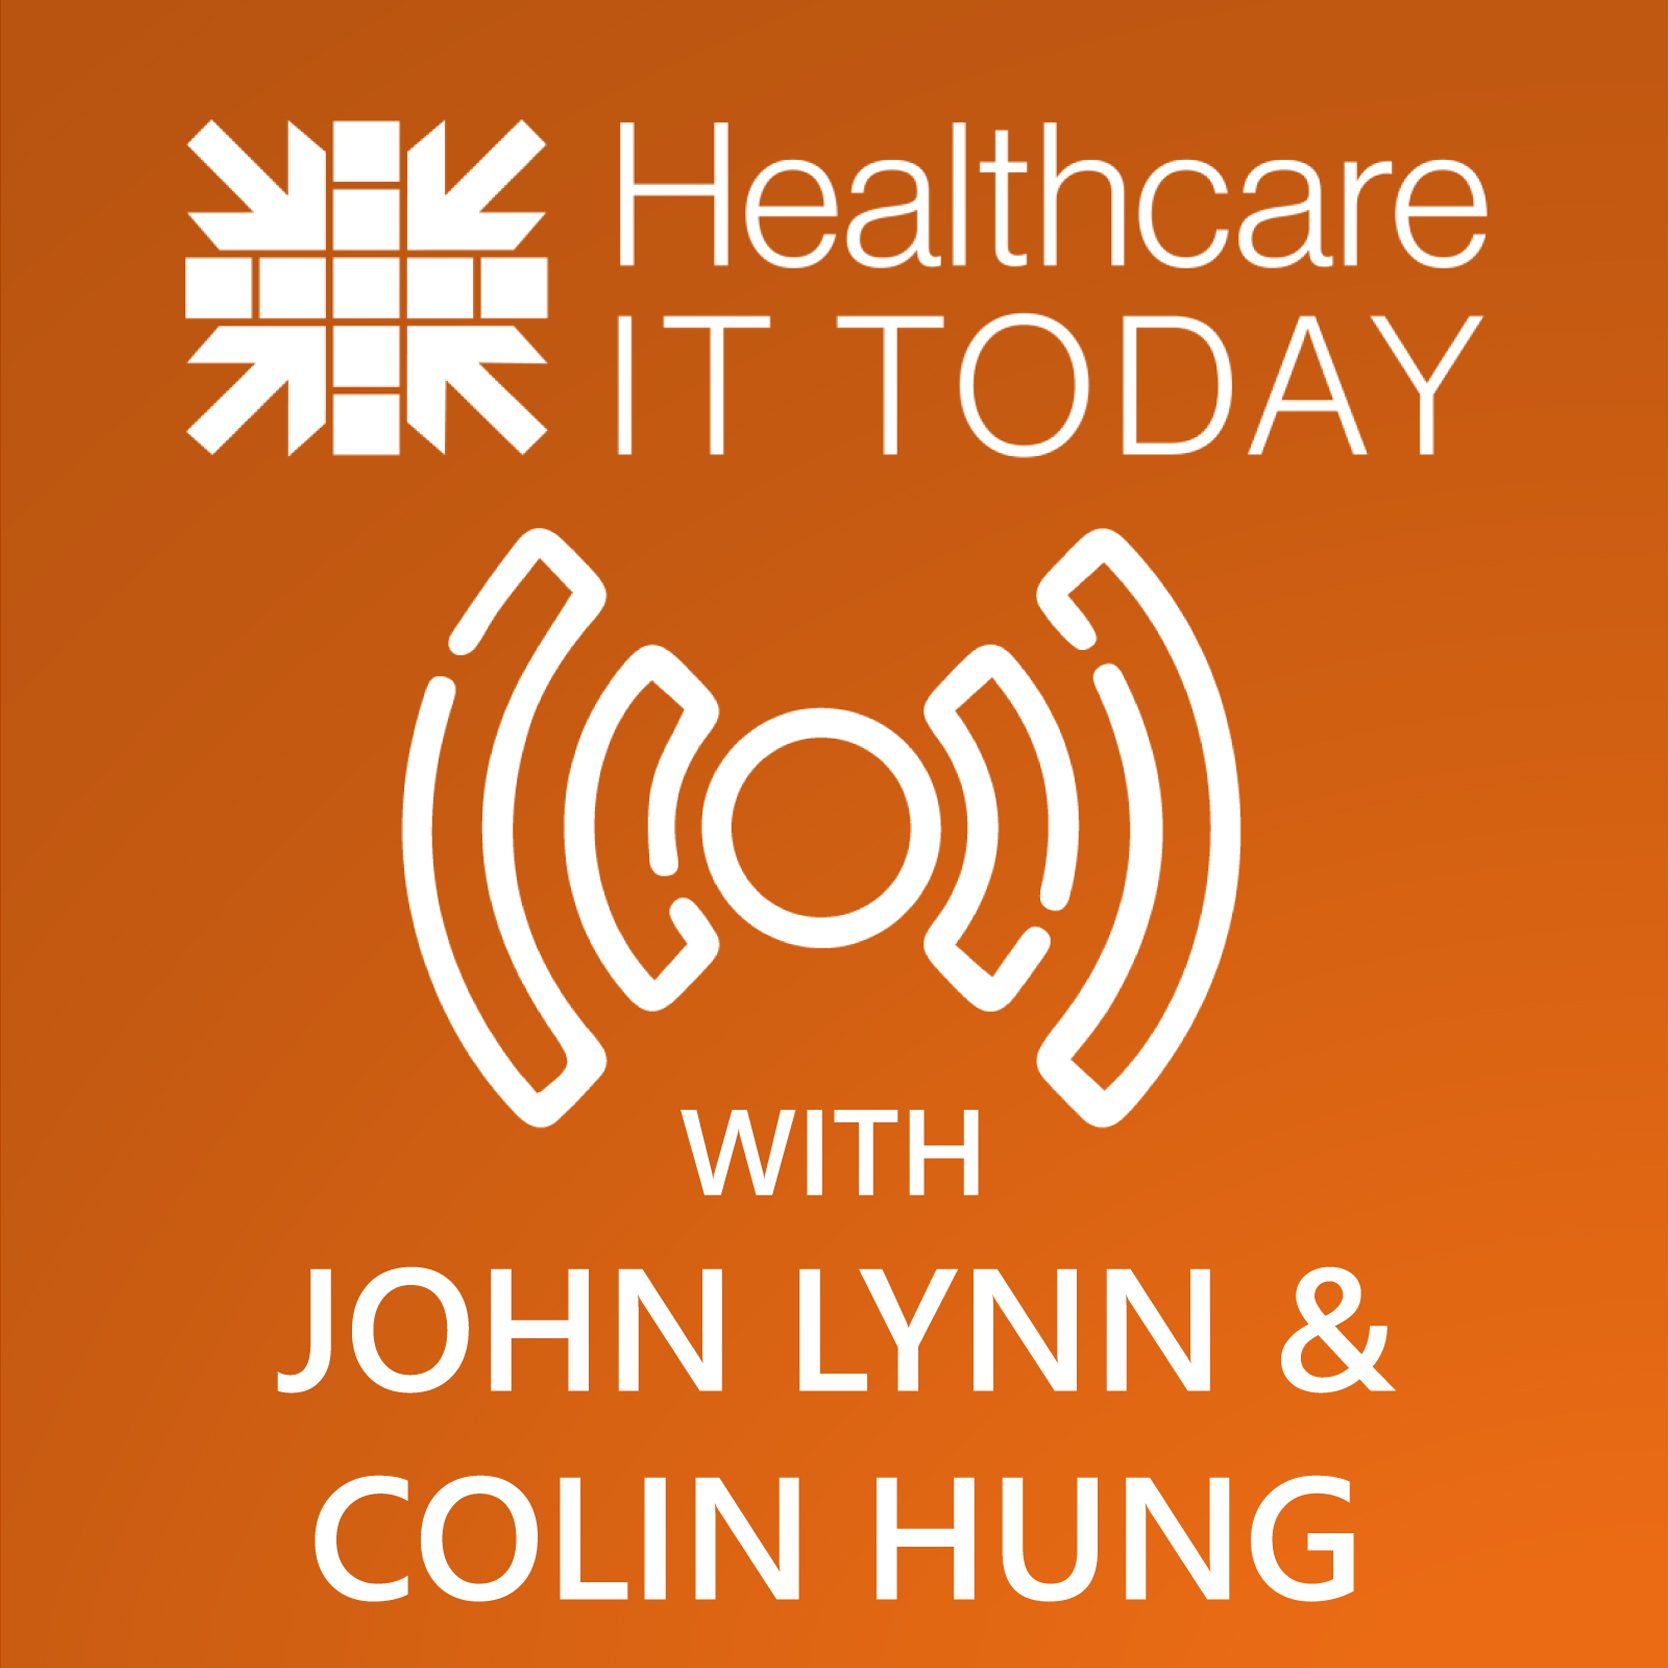 Health IT Media by the Numbers - Healthcare IT Today Podcast Episode 141